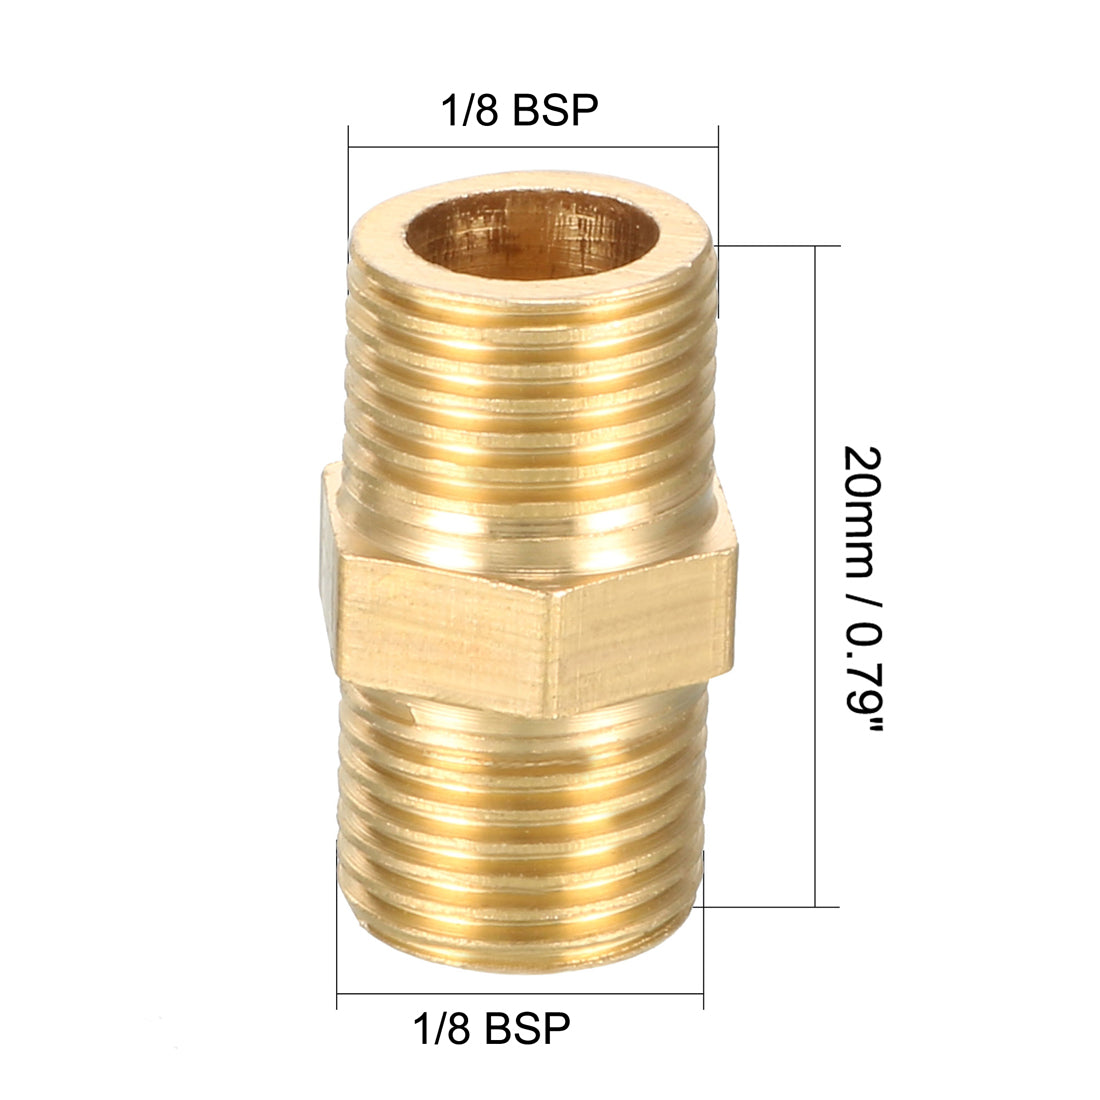 uxcell Uxcell Brass Threaded Pipe Fitting 1/8 BSP Male x 1/8 BSP Male Hex Bushing Adapter 3pcs